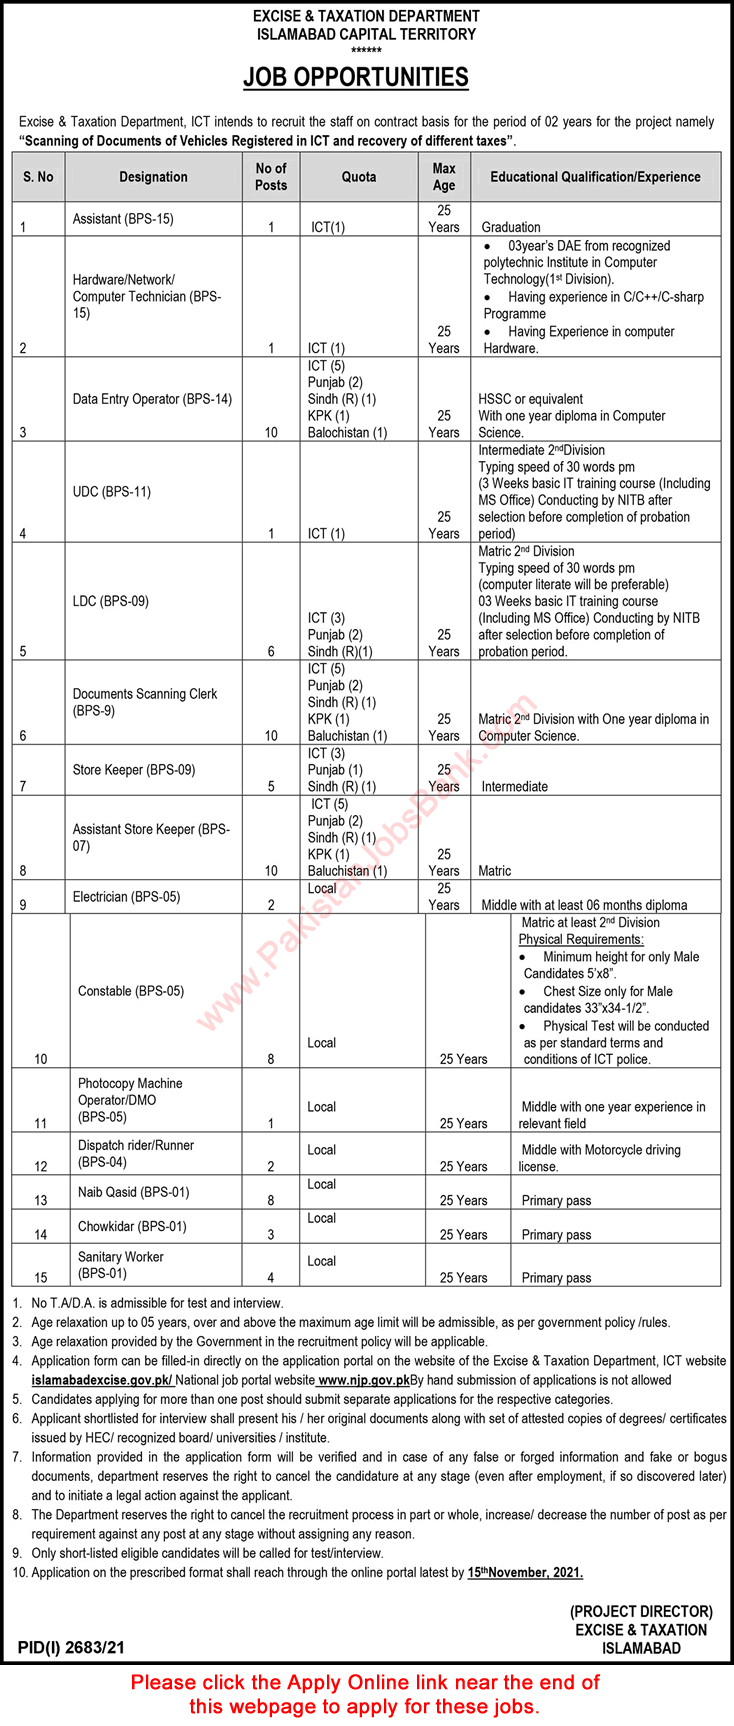 Excise and Taxation Department Islamabad Jobs October 2021 November Apply Online Data Entry Operators & Others Latest